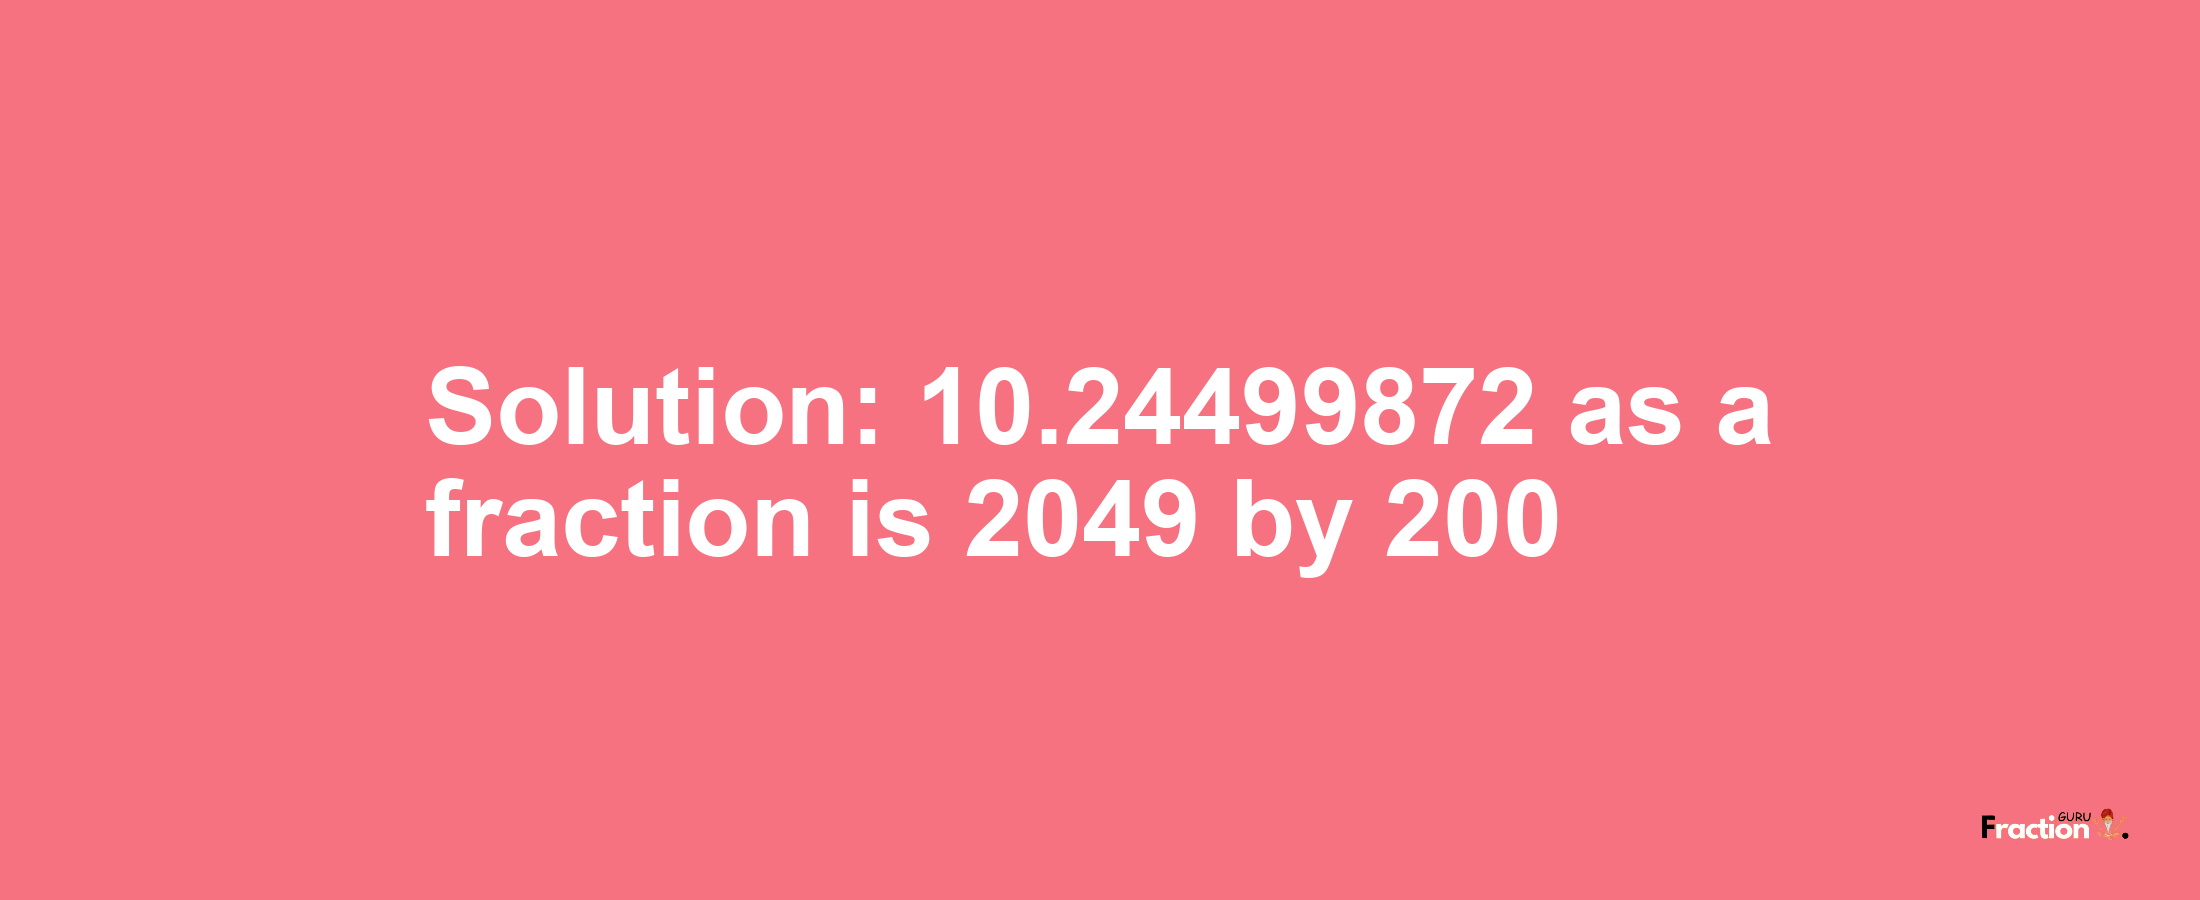 Solution:10.24499872 as a fraction is 2049/200